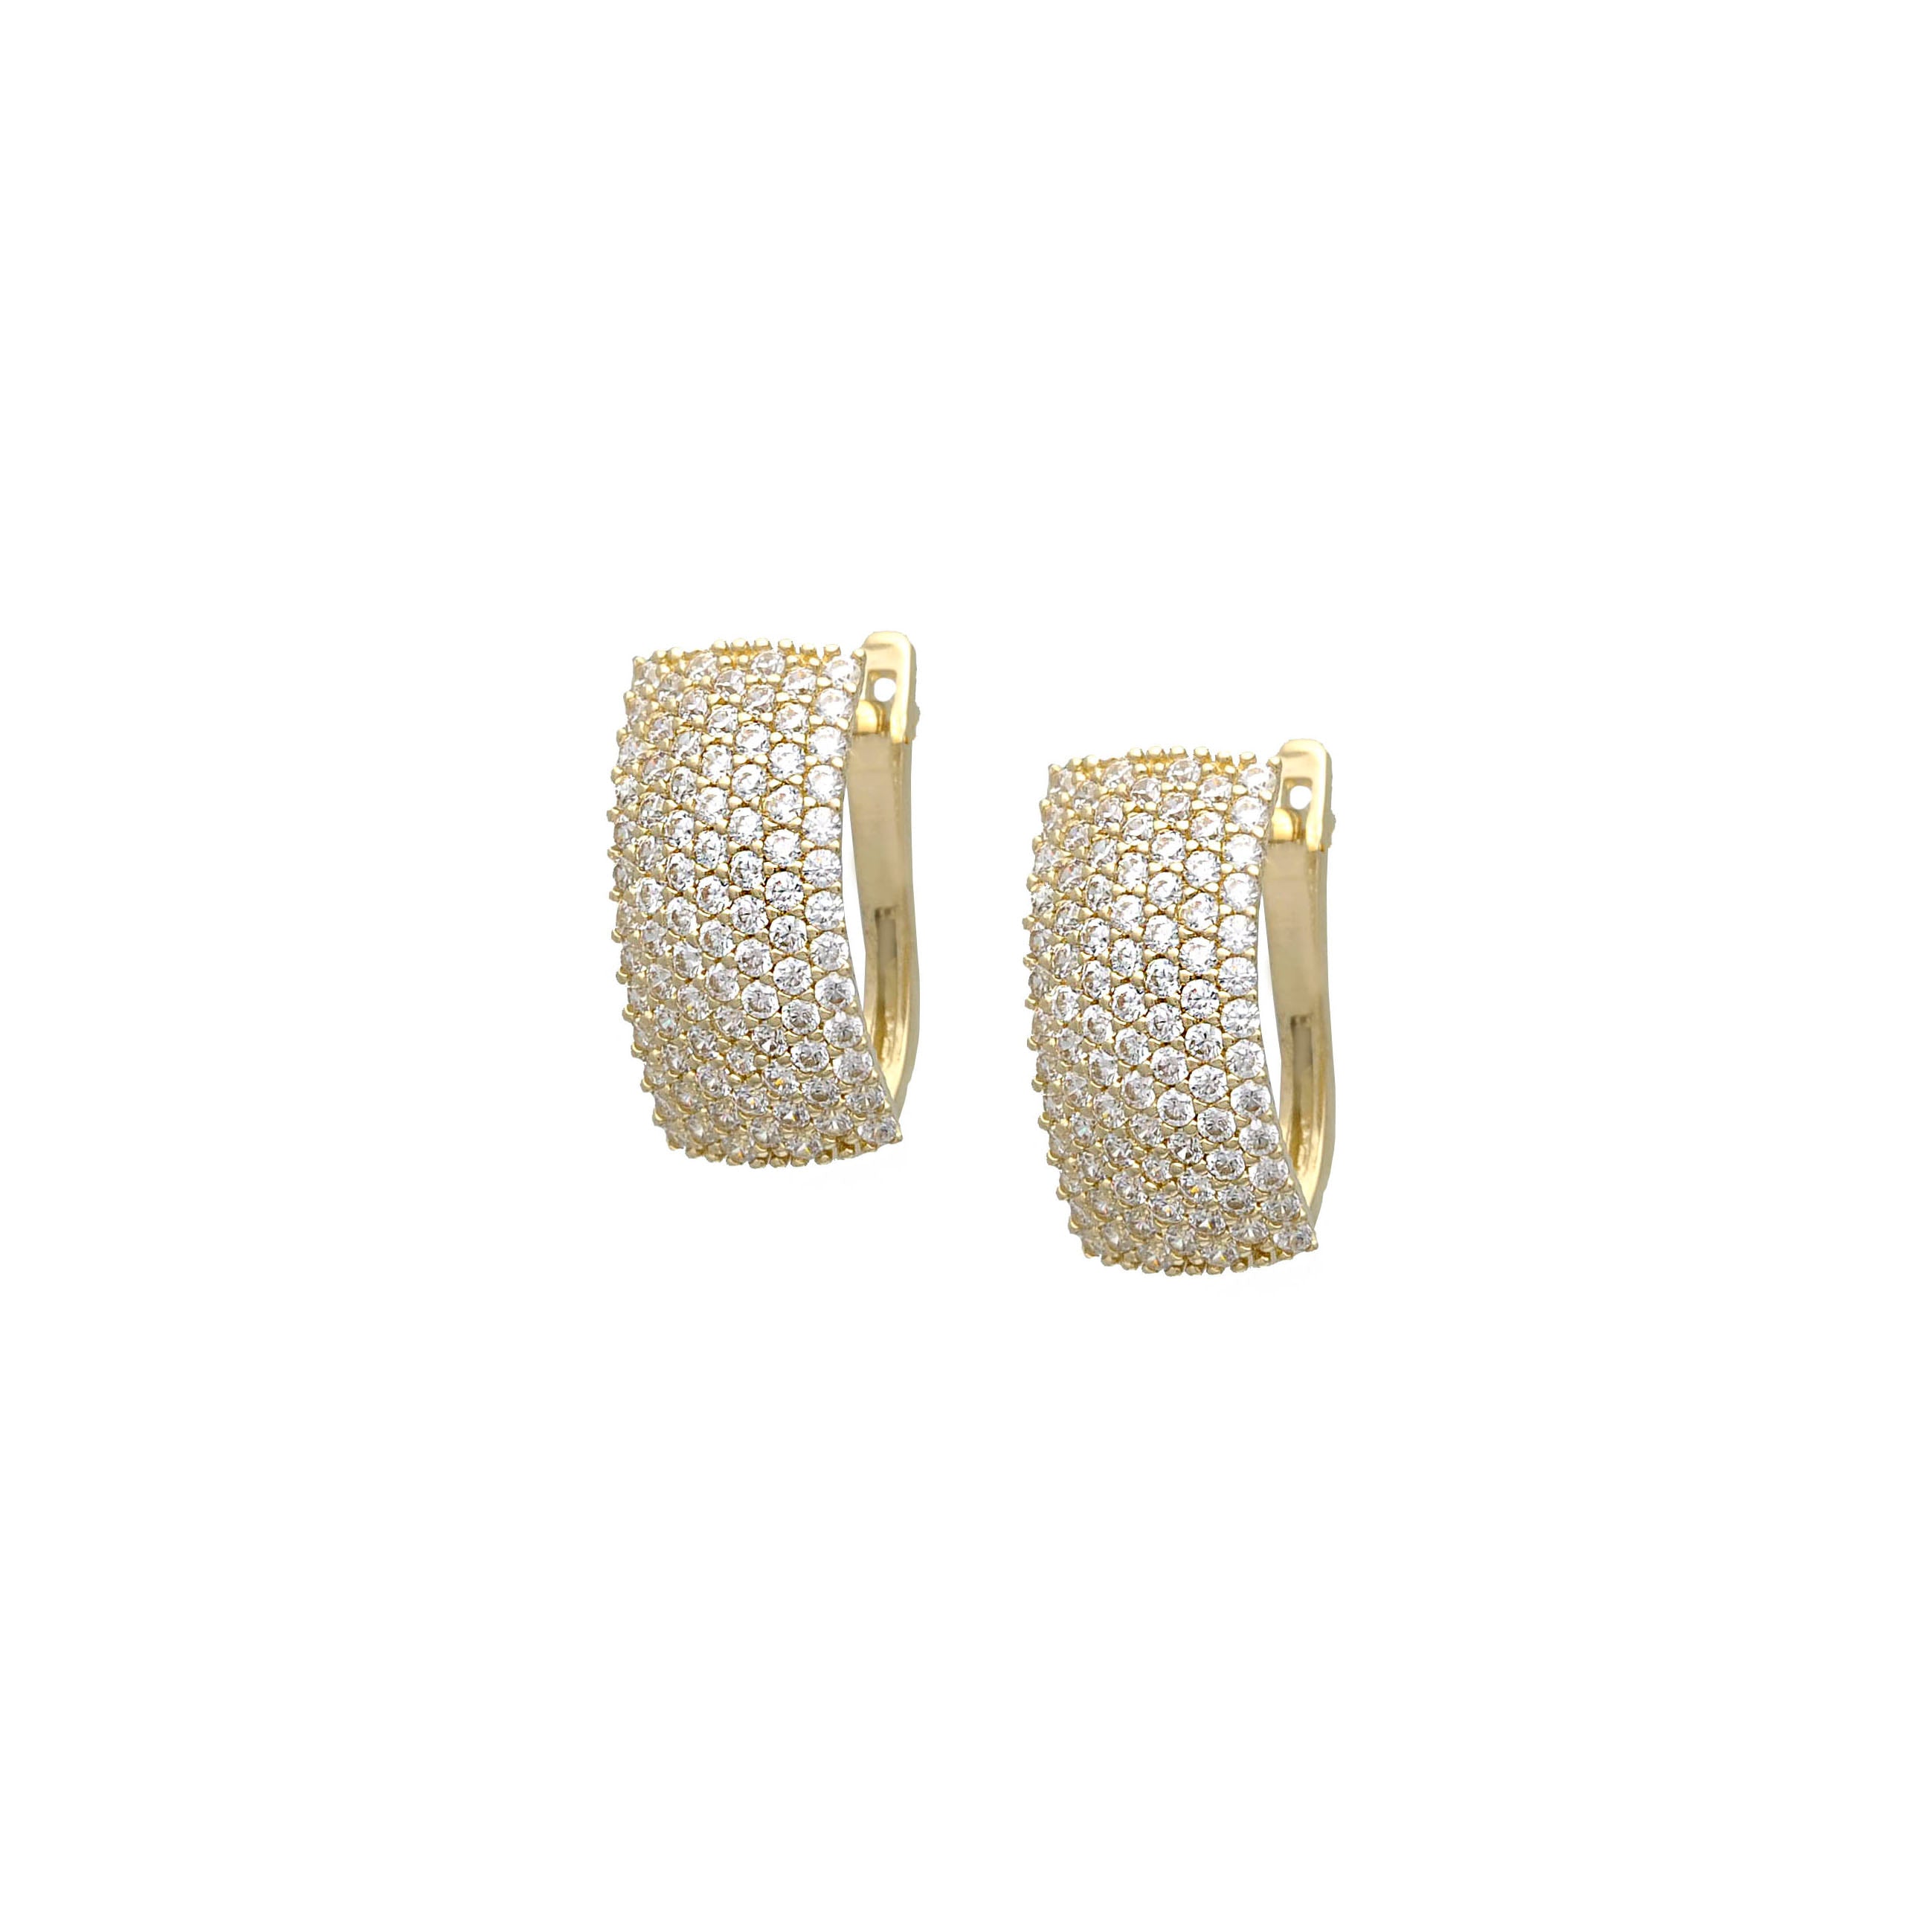 Lever back earrings in 14K yellow gold decorated with shiny diamond-cut zirconium.